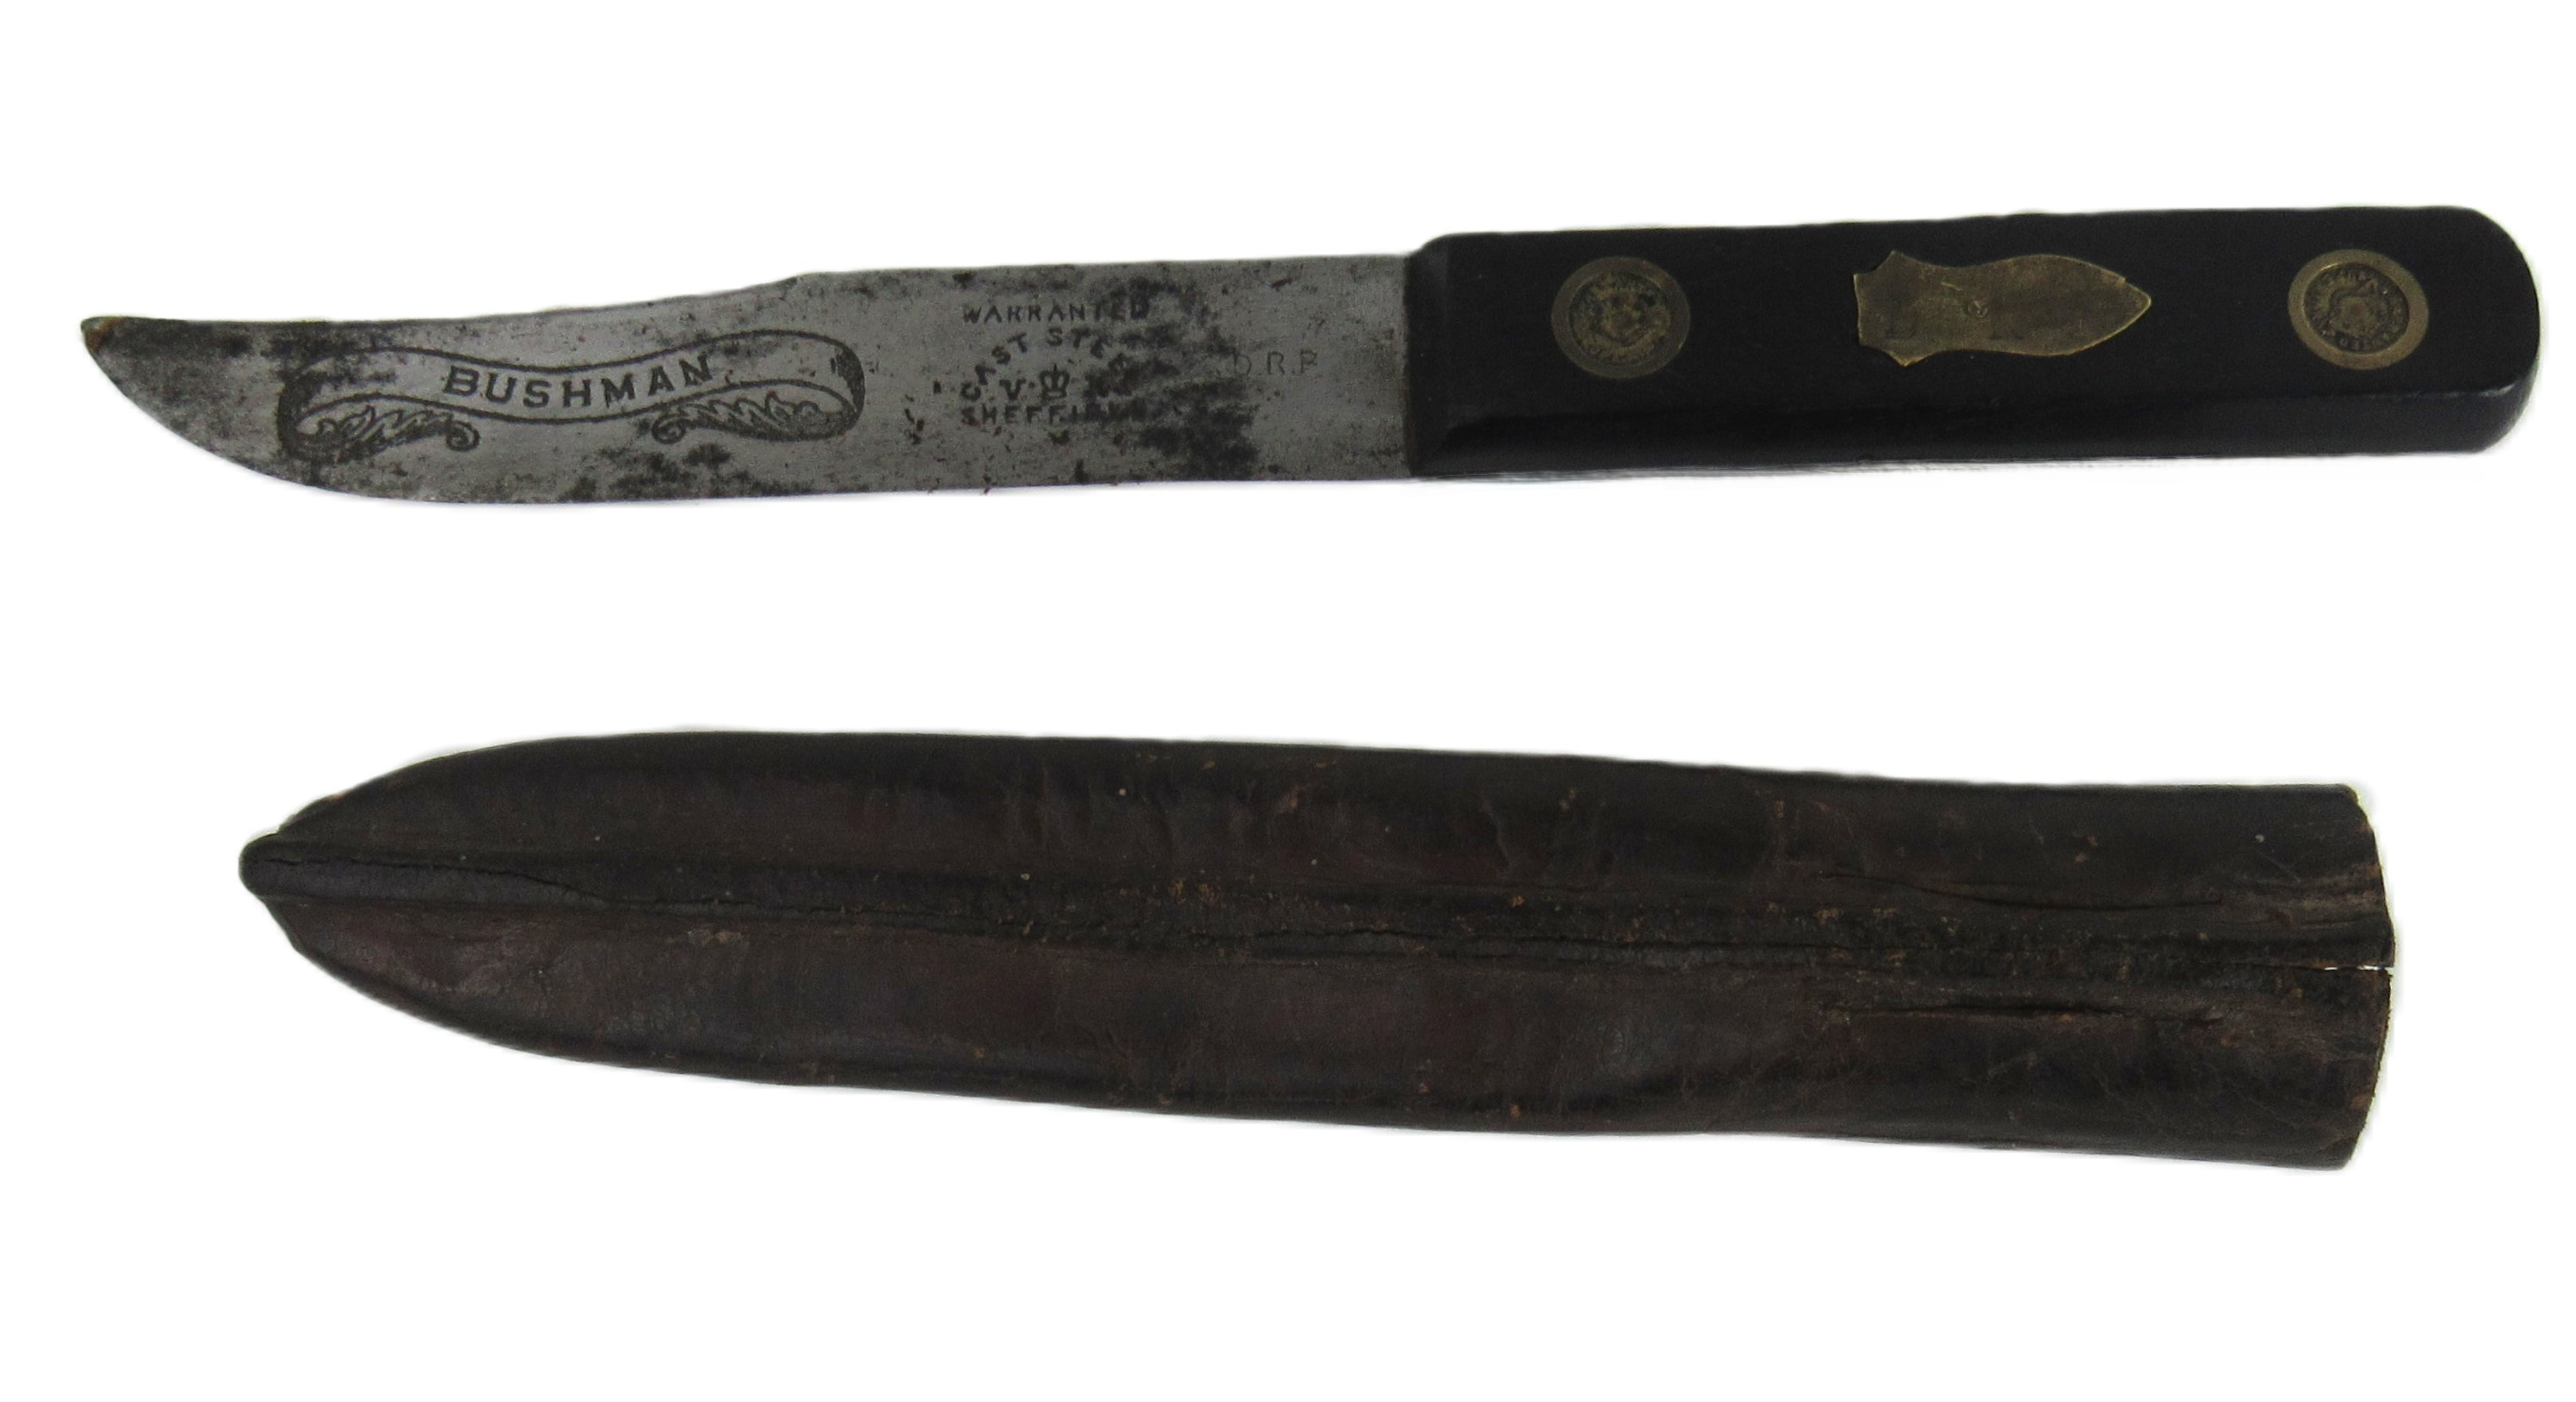 Militaria: A Victorian 'Bushman' Hunting or Fighting Knife, marked warranted cast steel, - Image 2 of 2